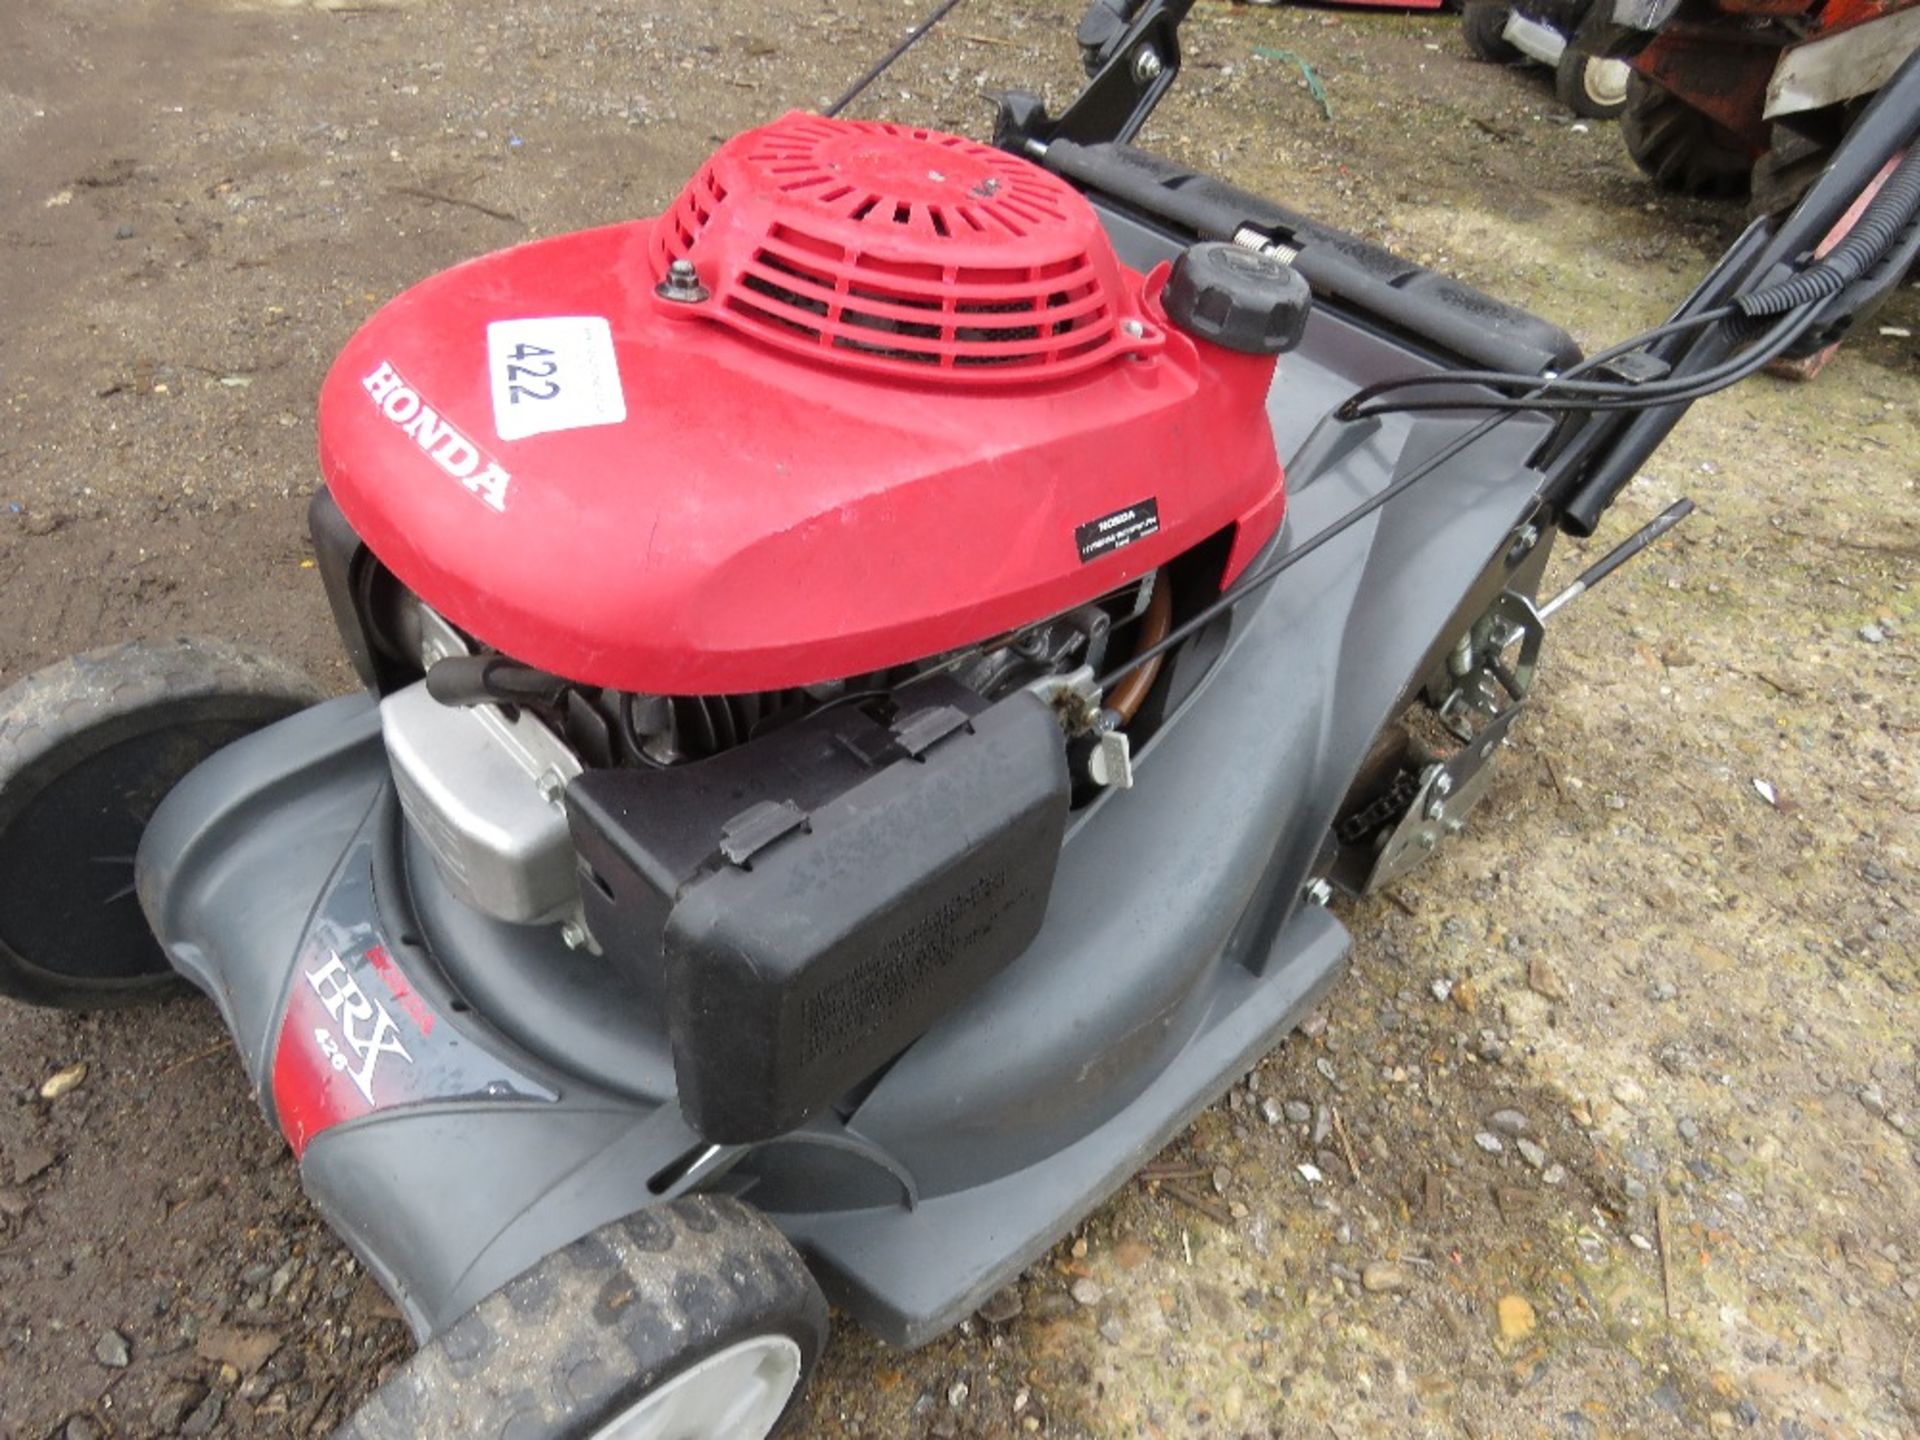 HONDA HRX426 PETROL ENGINE ROLLER MOWER, NO COLLECTOR.....THIS LOT IS SOLD UNDER THE AUCTIONEERS MAR